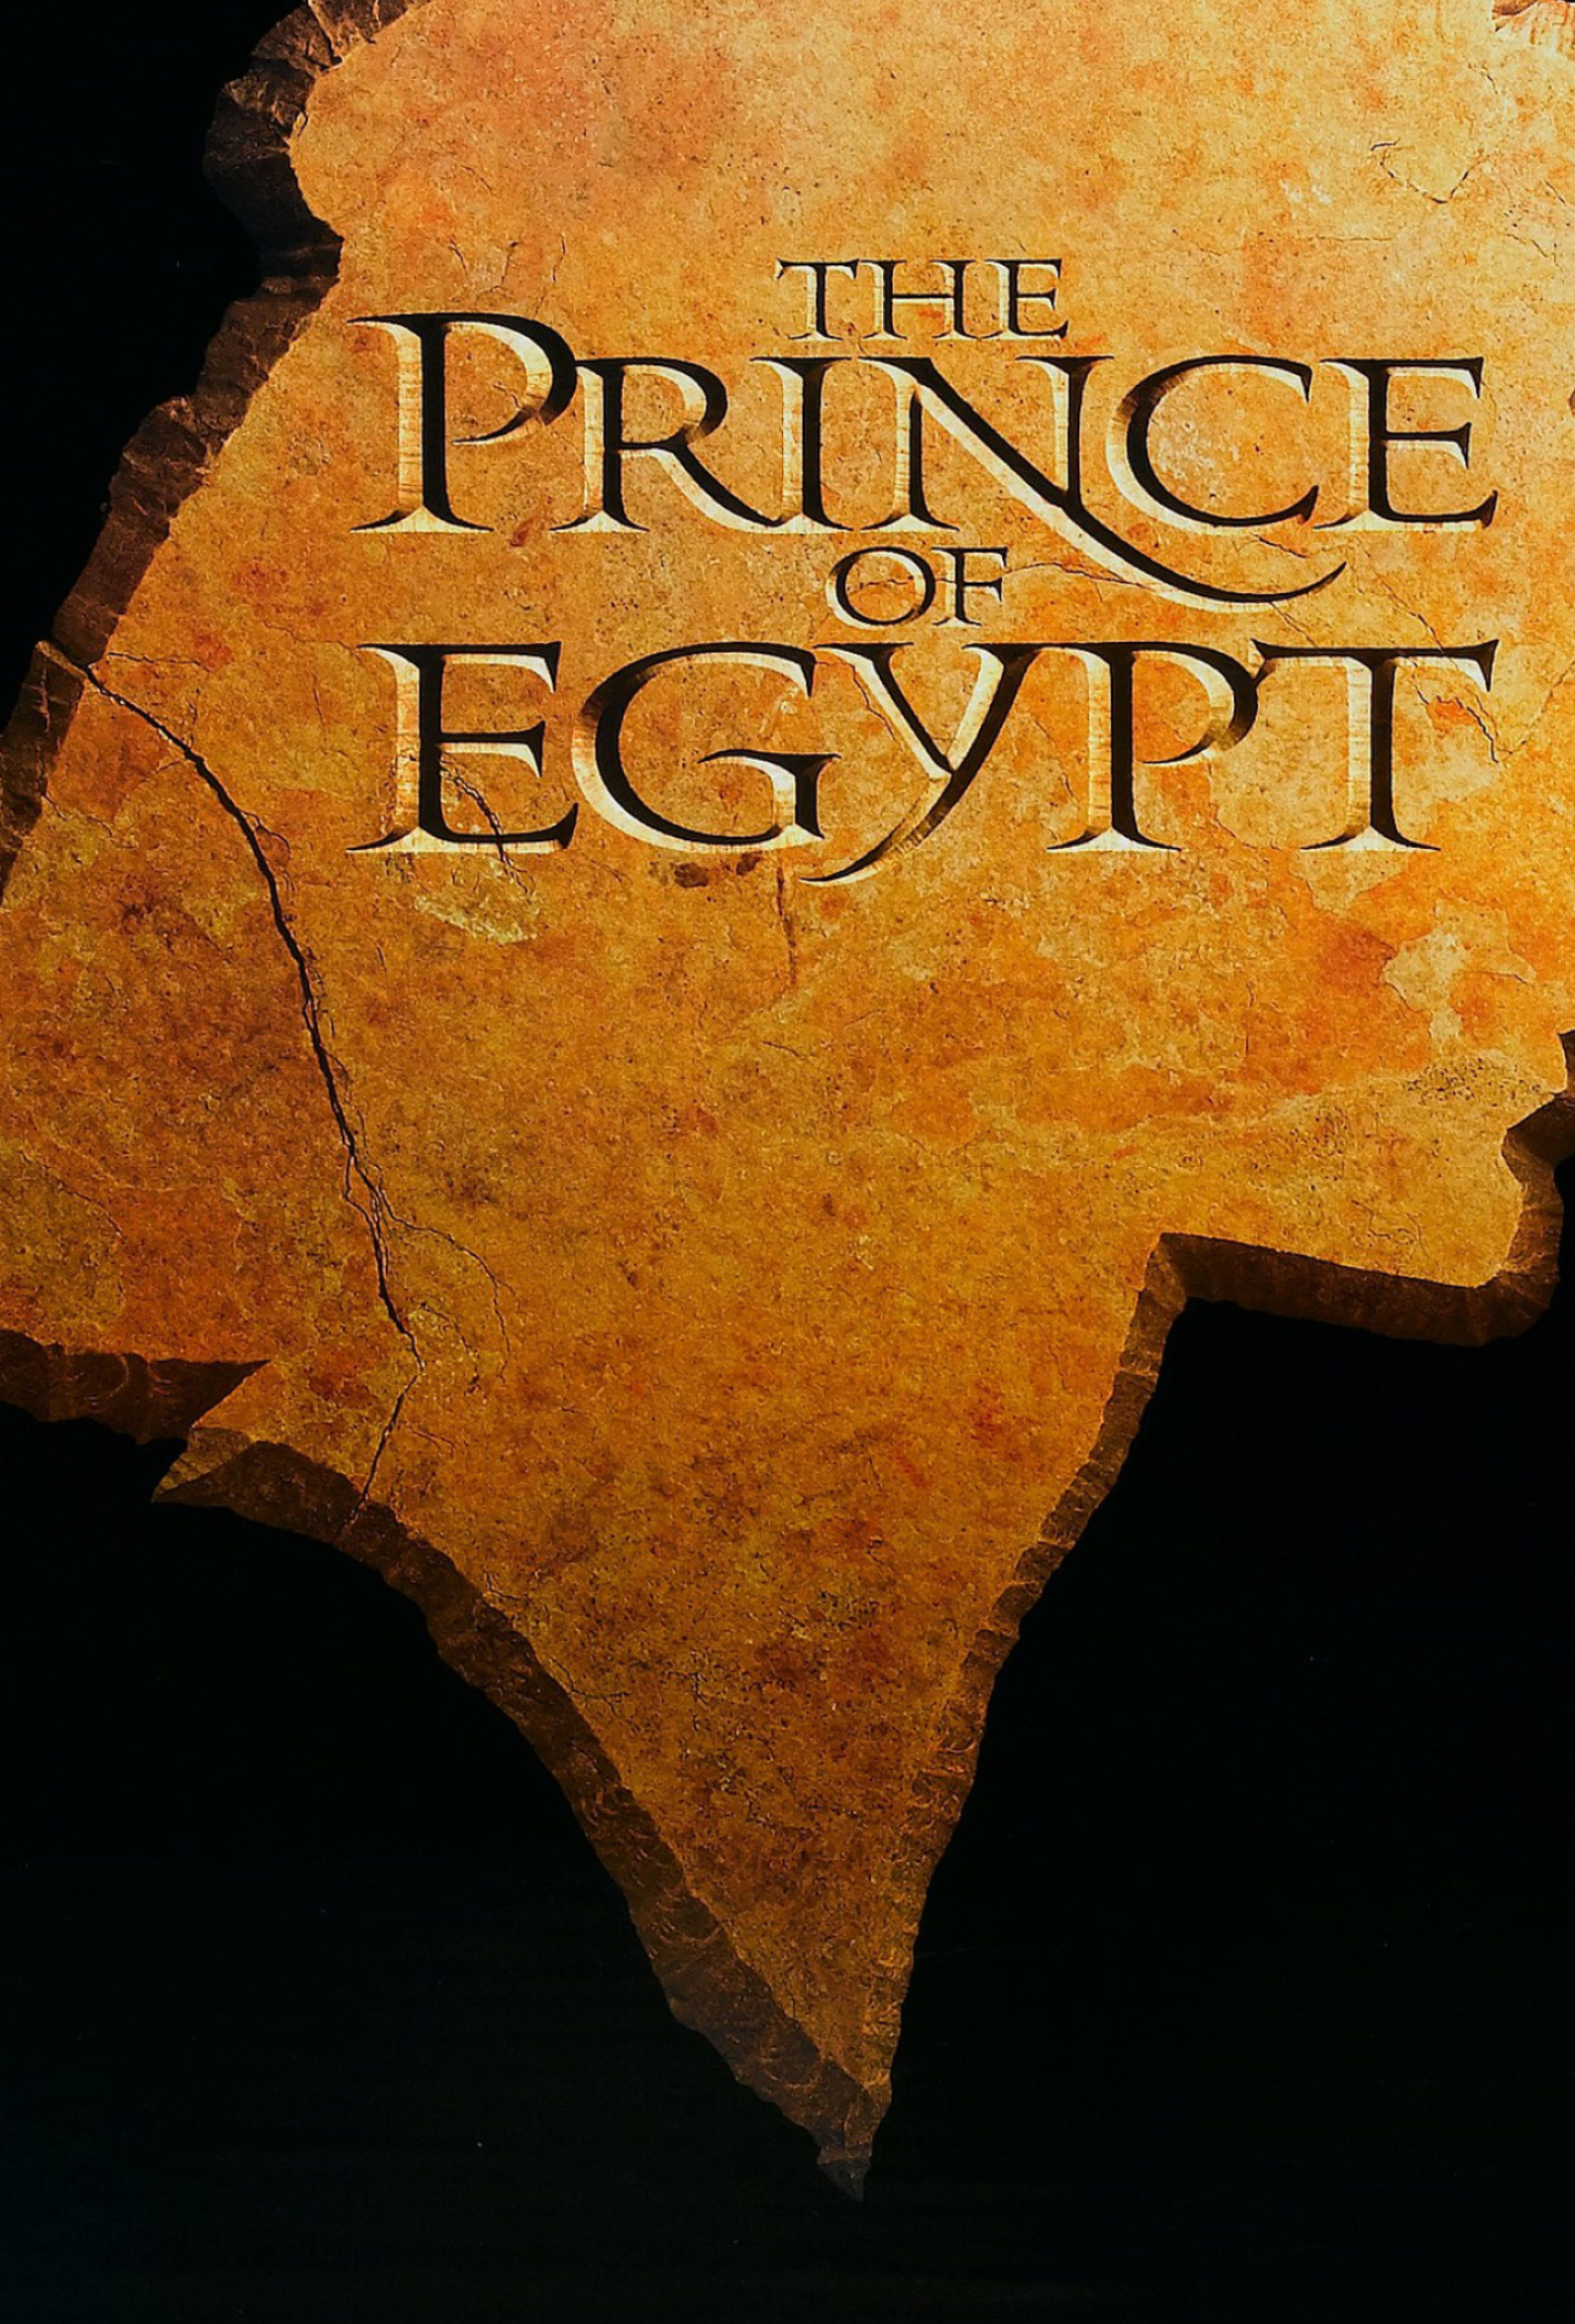 Prince of Egypt wallpapers, Most popular backgrounds, Spectacular imagery, Animated art, 1600x2360 HD Handy